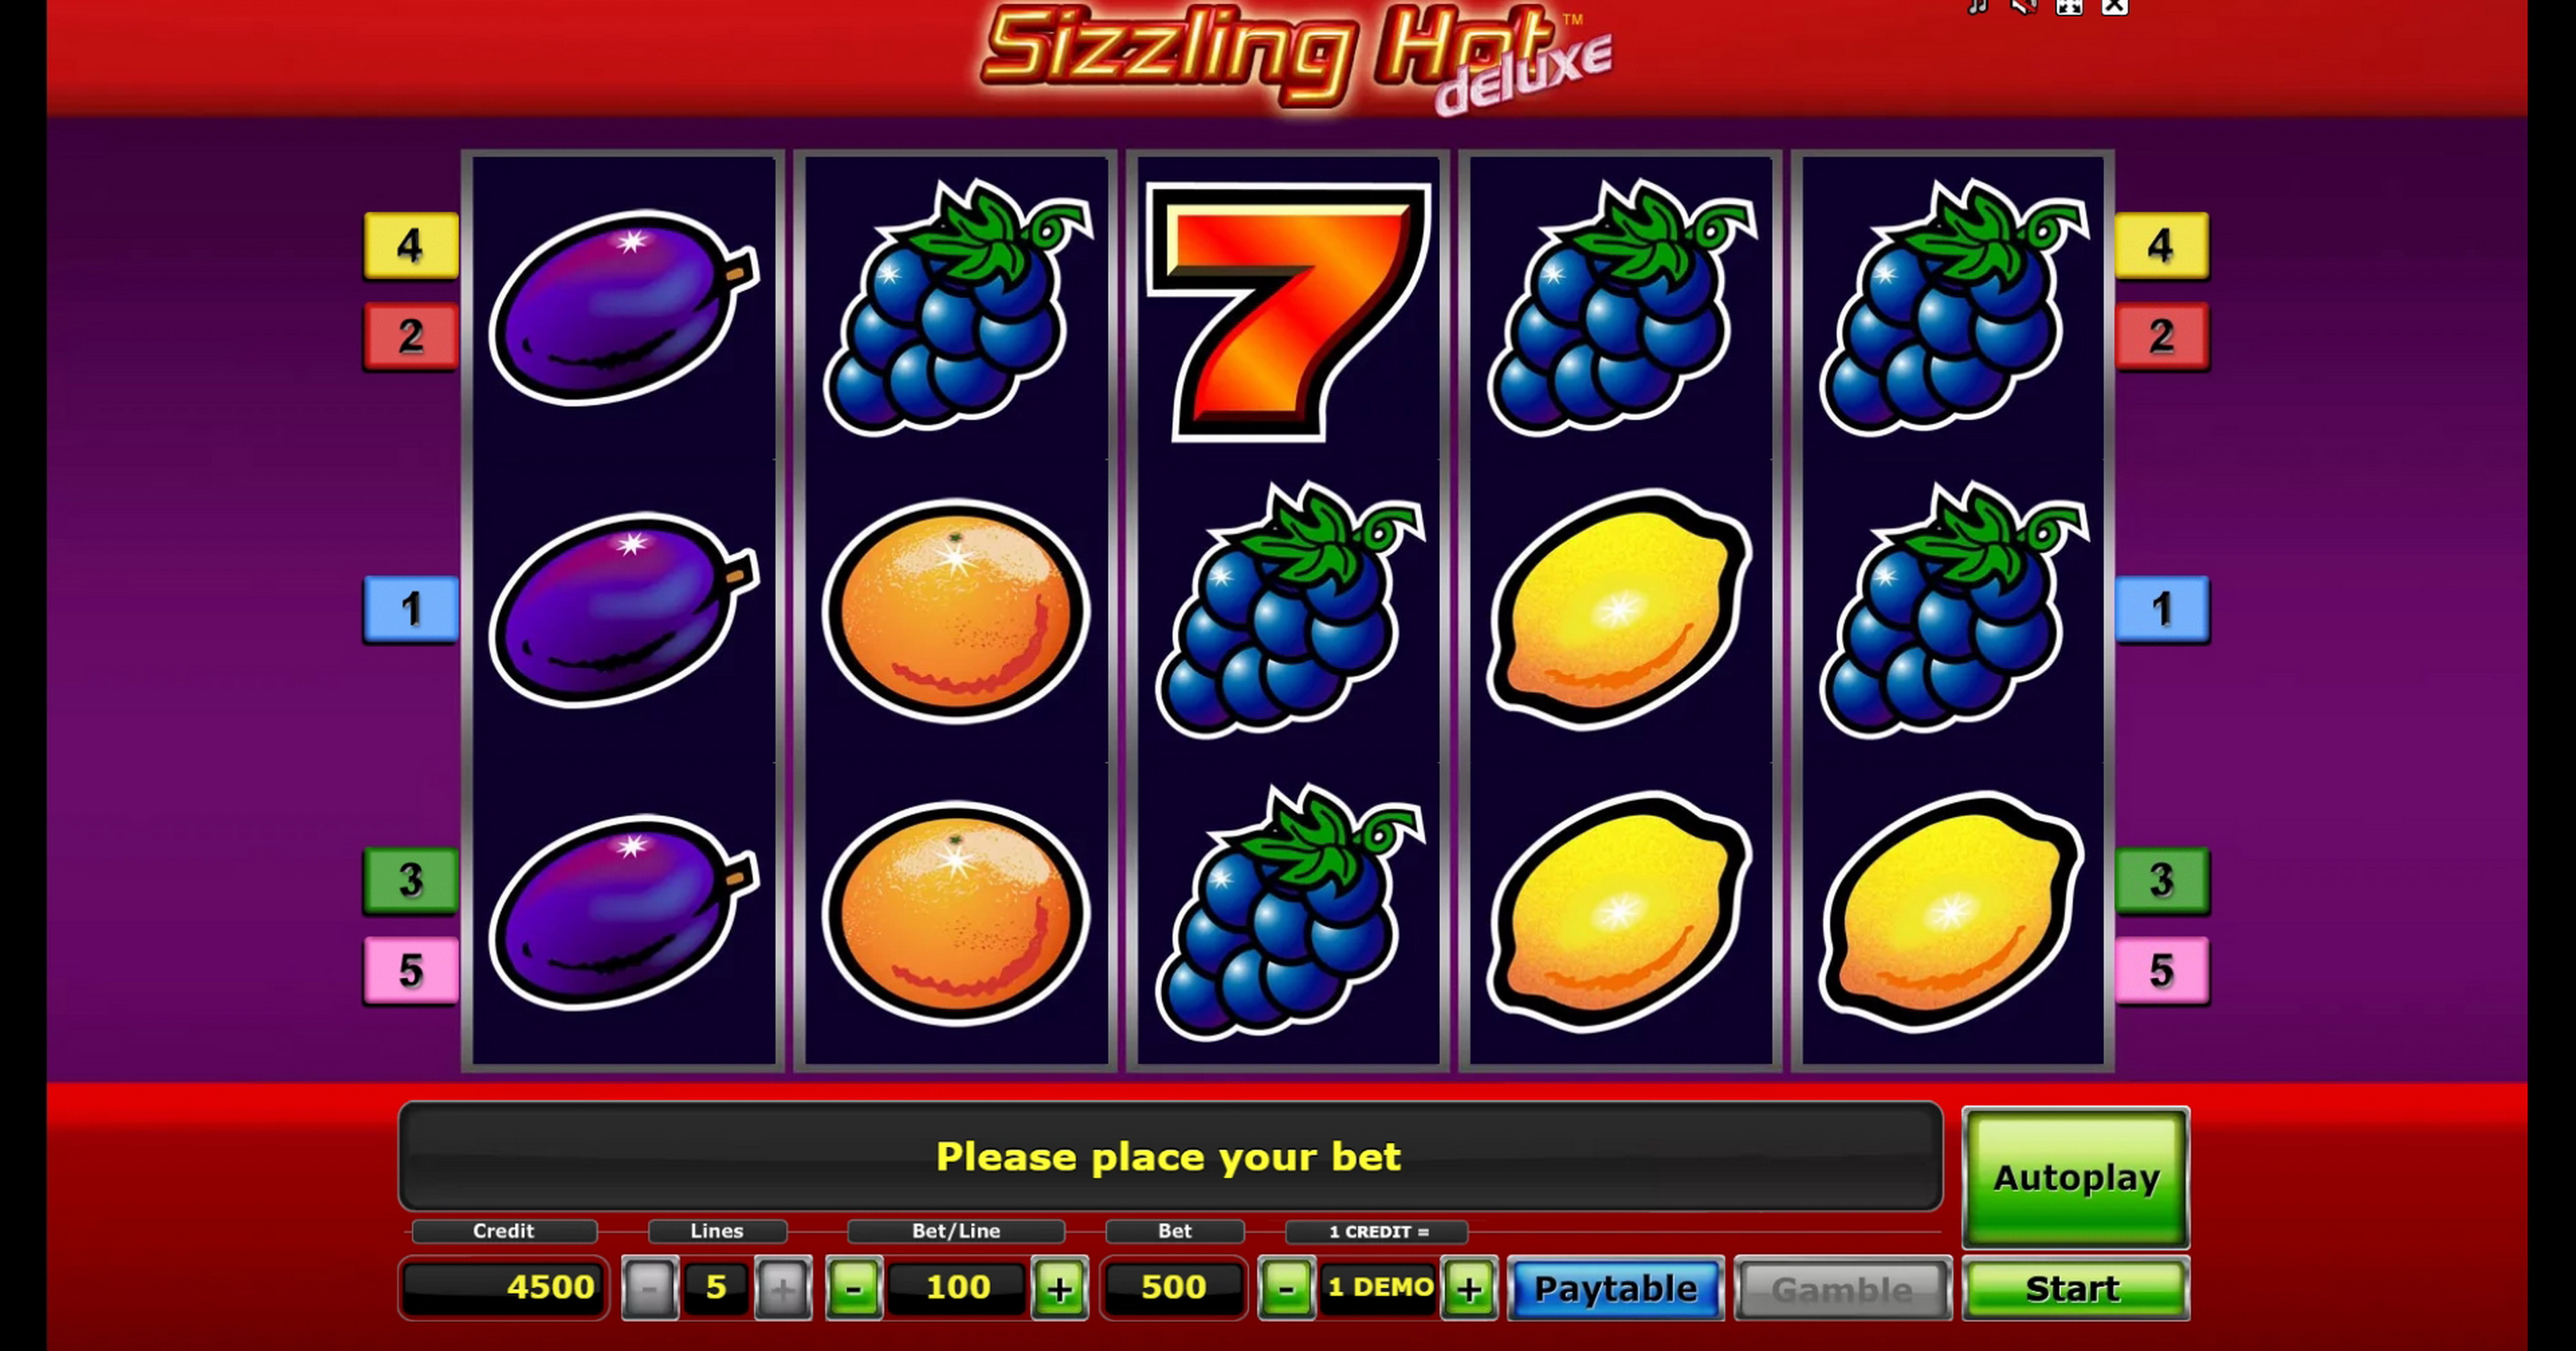 Sizzling Hot Free Game Play